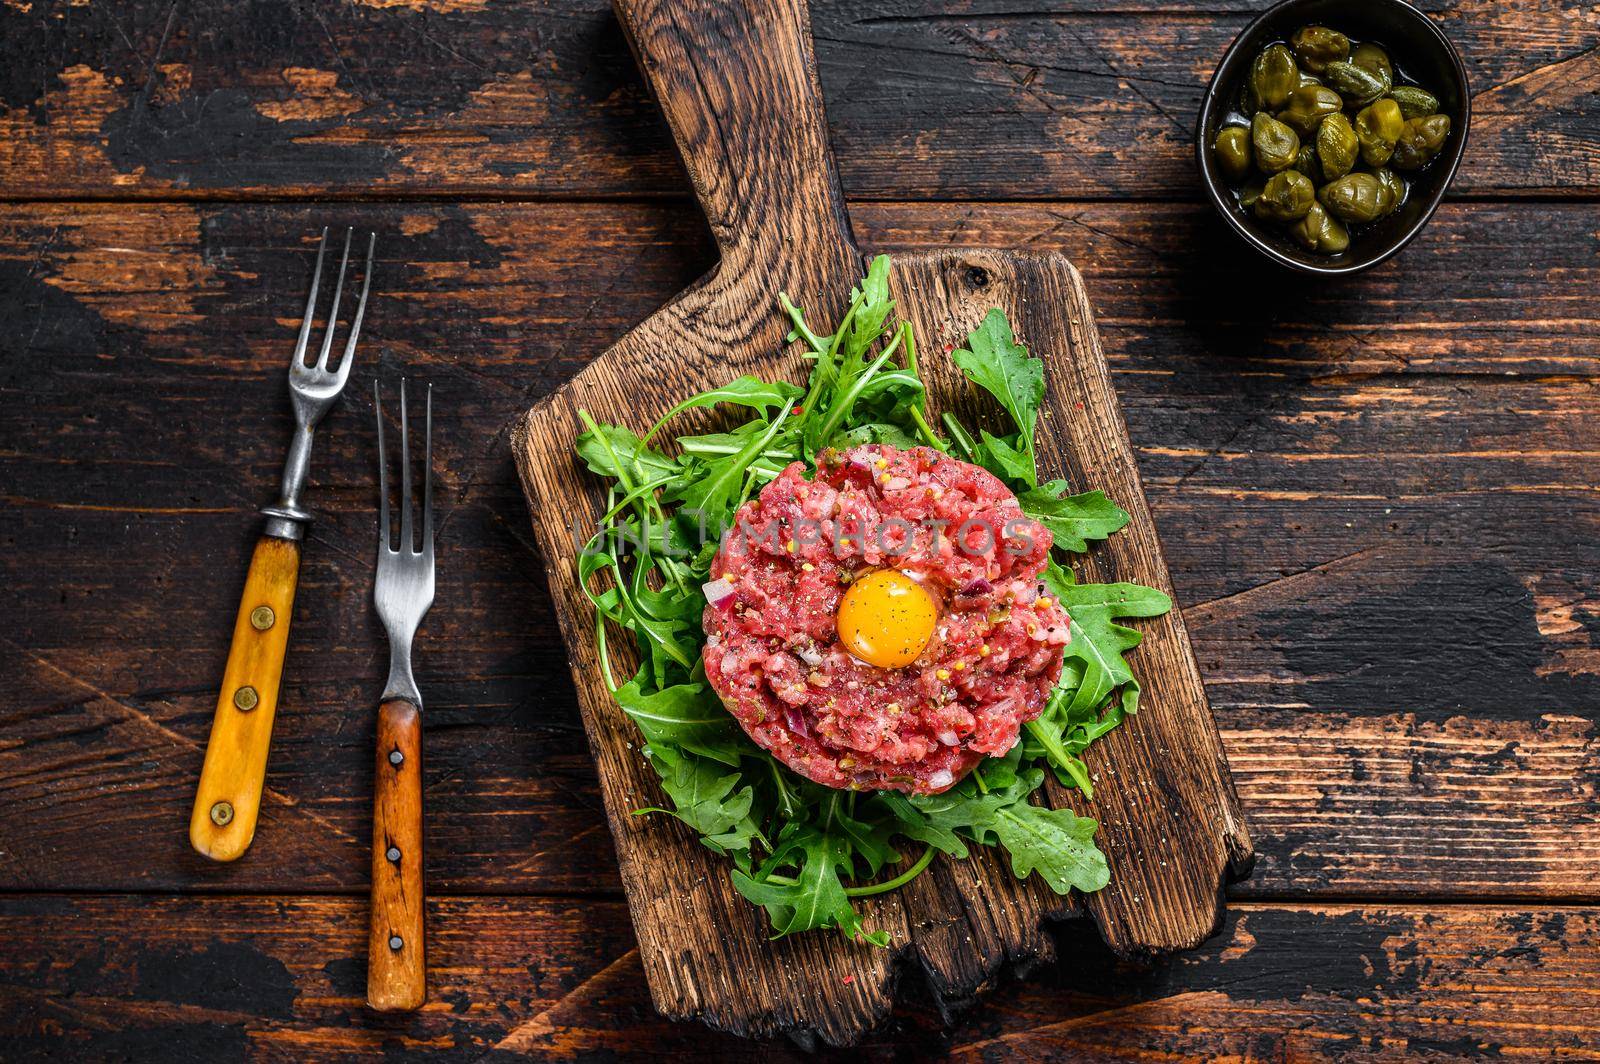 Tartar beef with a quail egg and arugula served on a cutting board. Dark wooden background. Top view by Composter